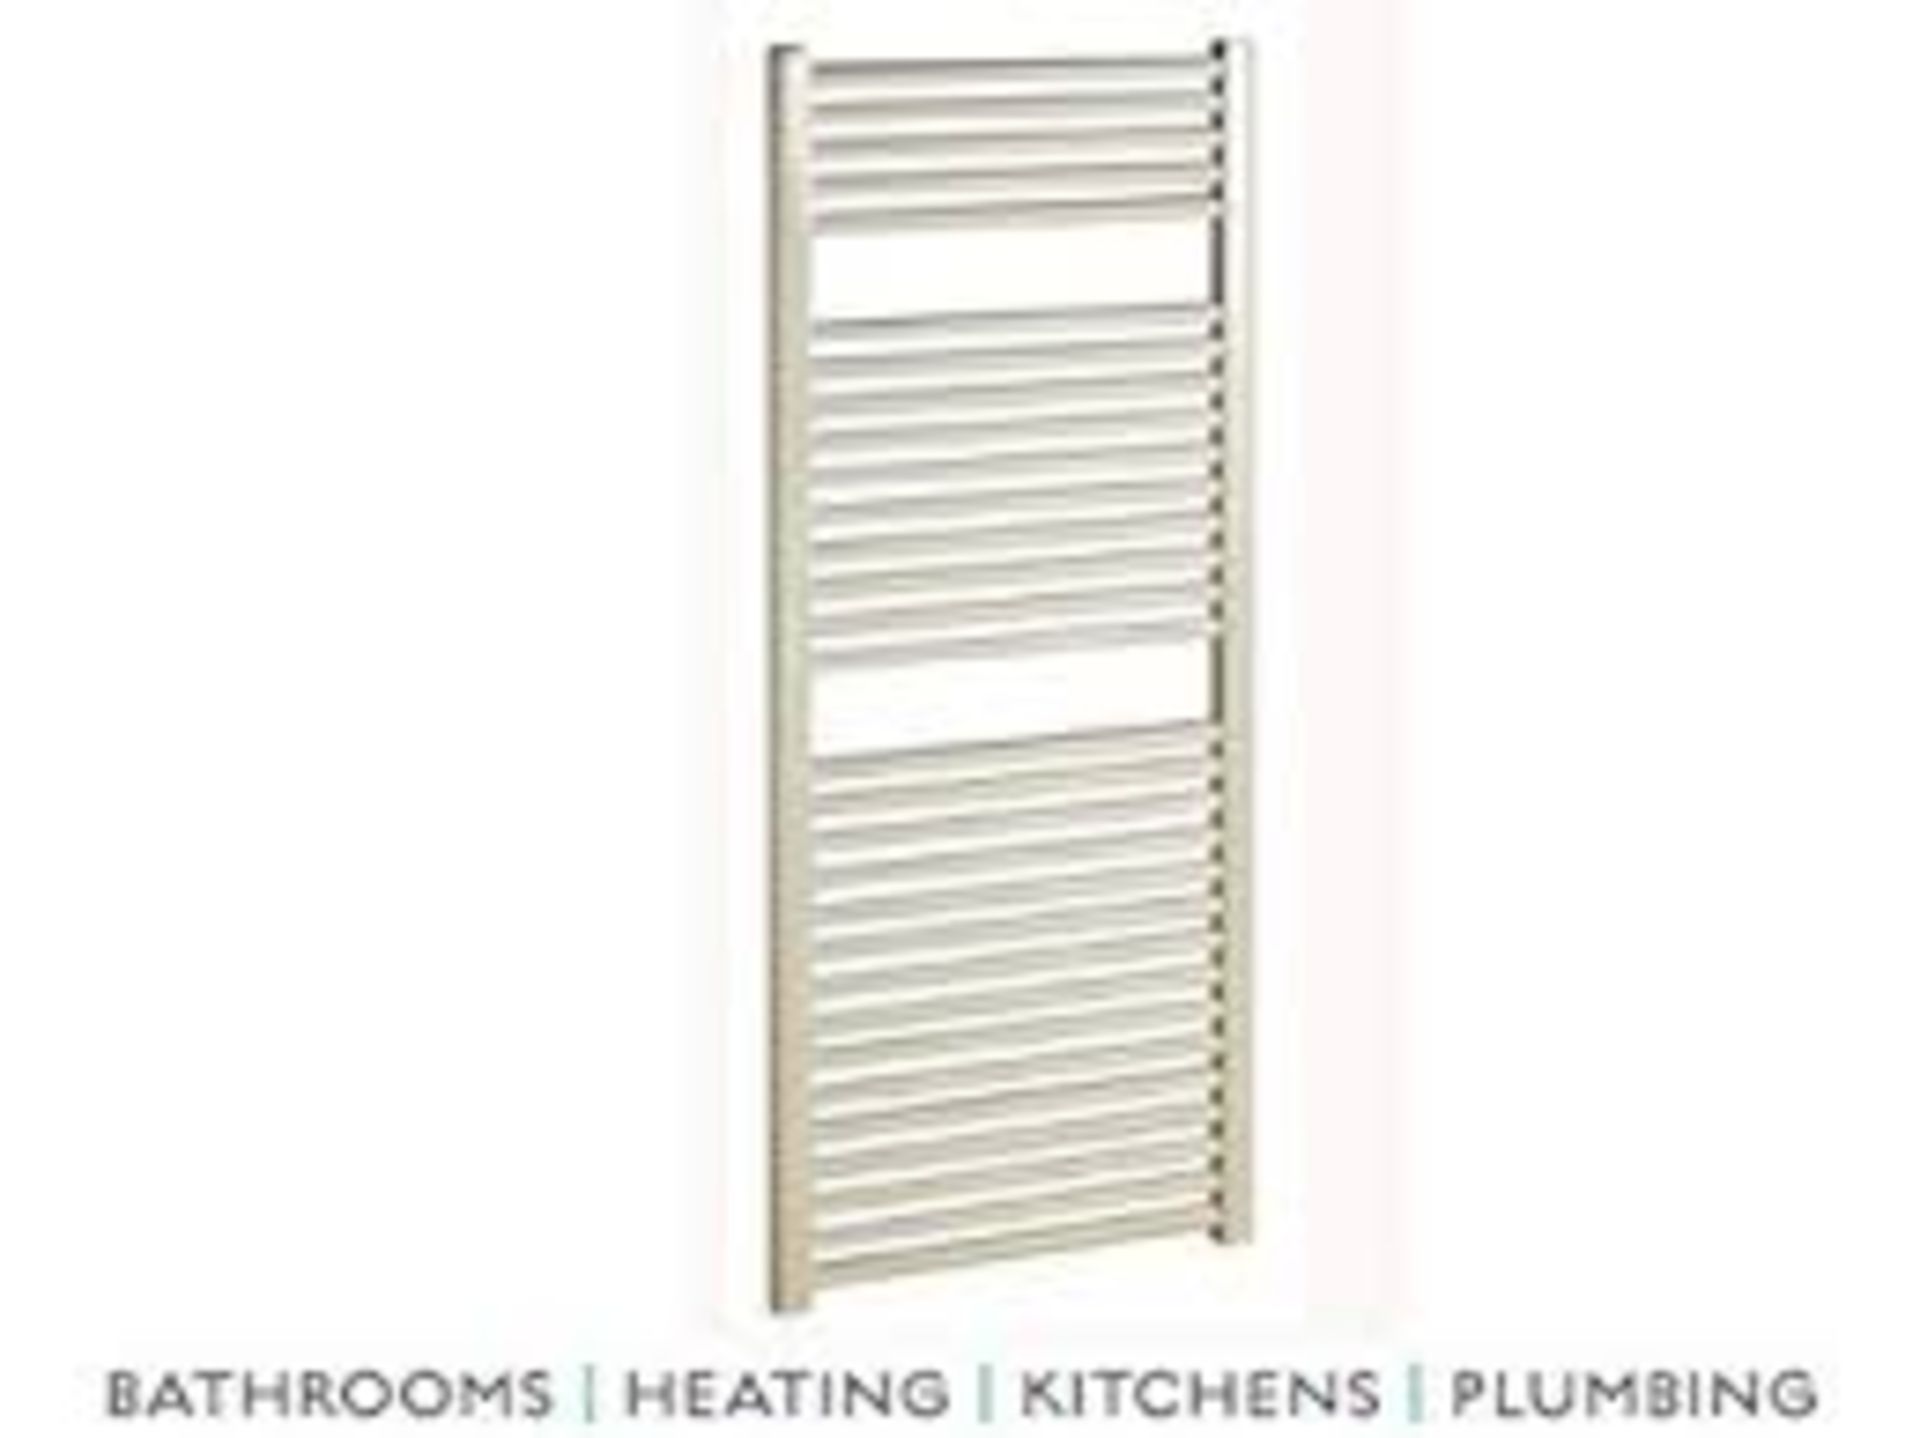 Boxed Stainless Steel Multi Rail Straight Towel Warmer RRP £60 (Pictures For Illustration Purposes